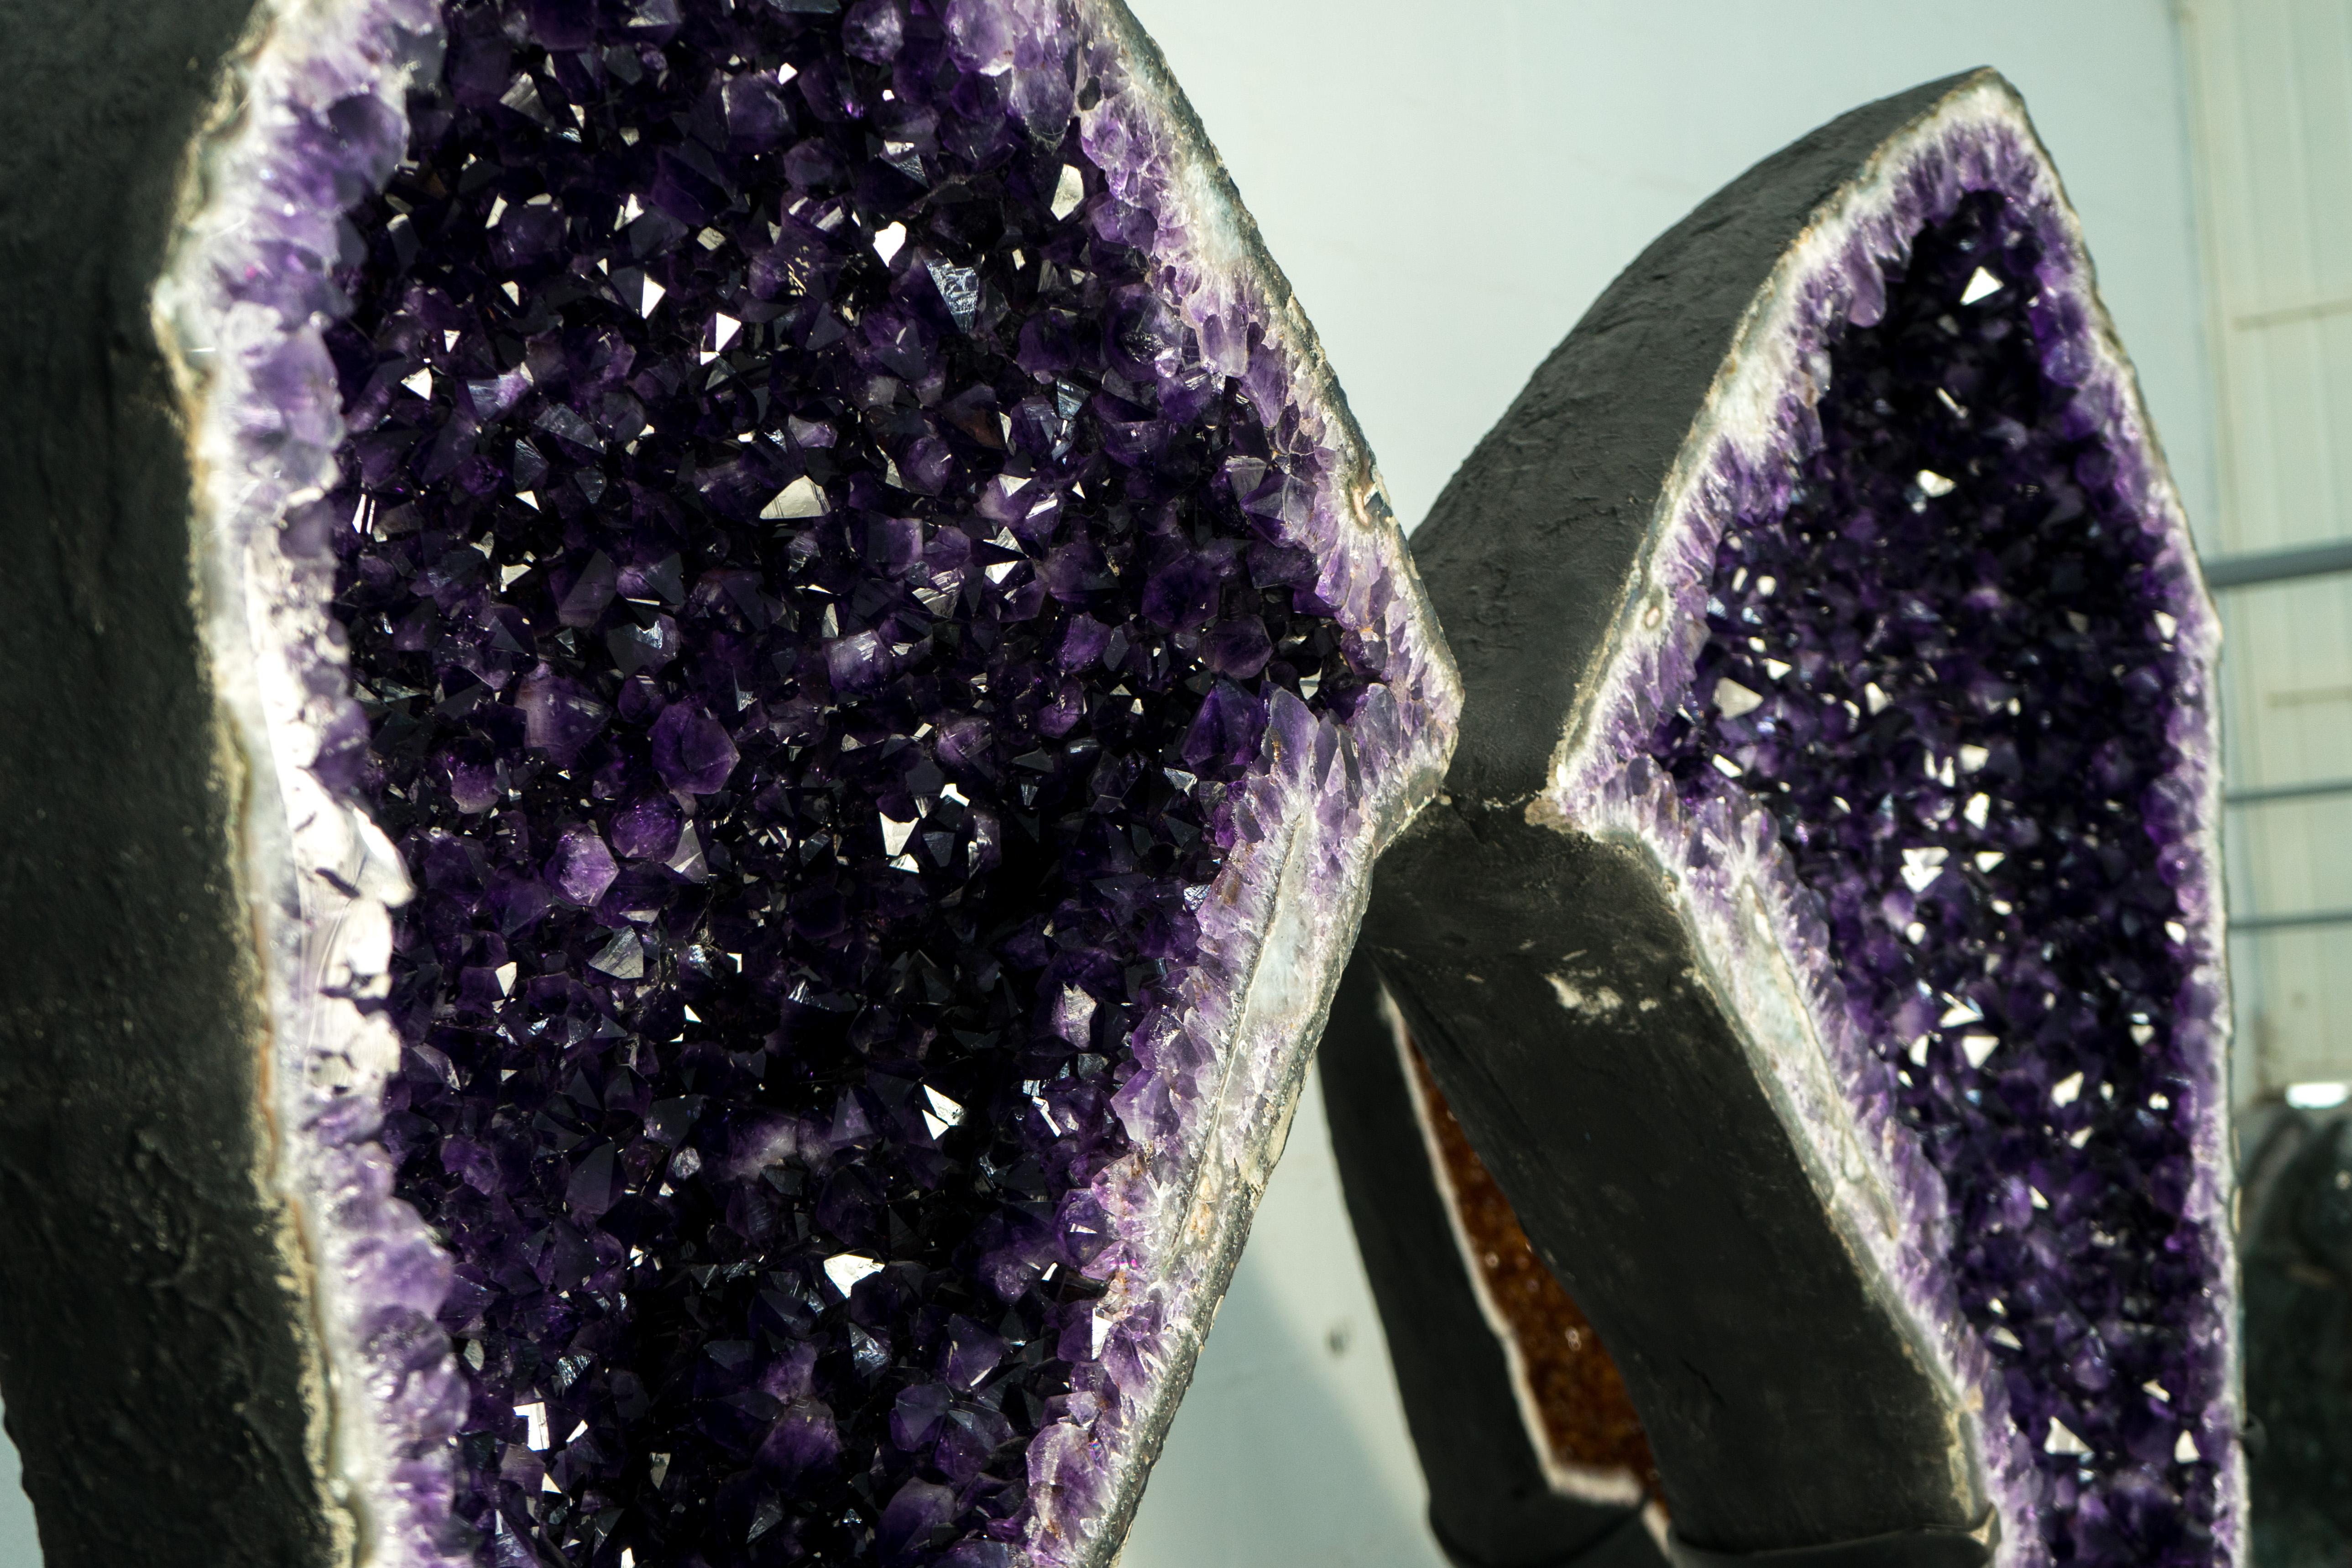 Spectacular 6.9 Ft Tall Pair of Giant Amethyst Geodes AAA Dark Purple Amethyst For Sale 2